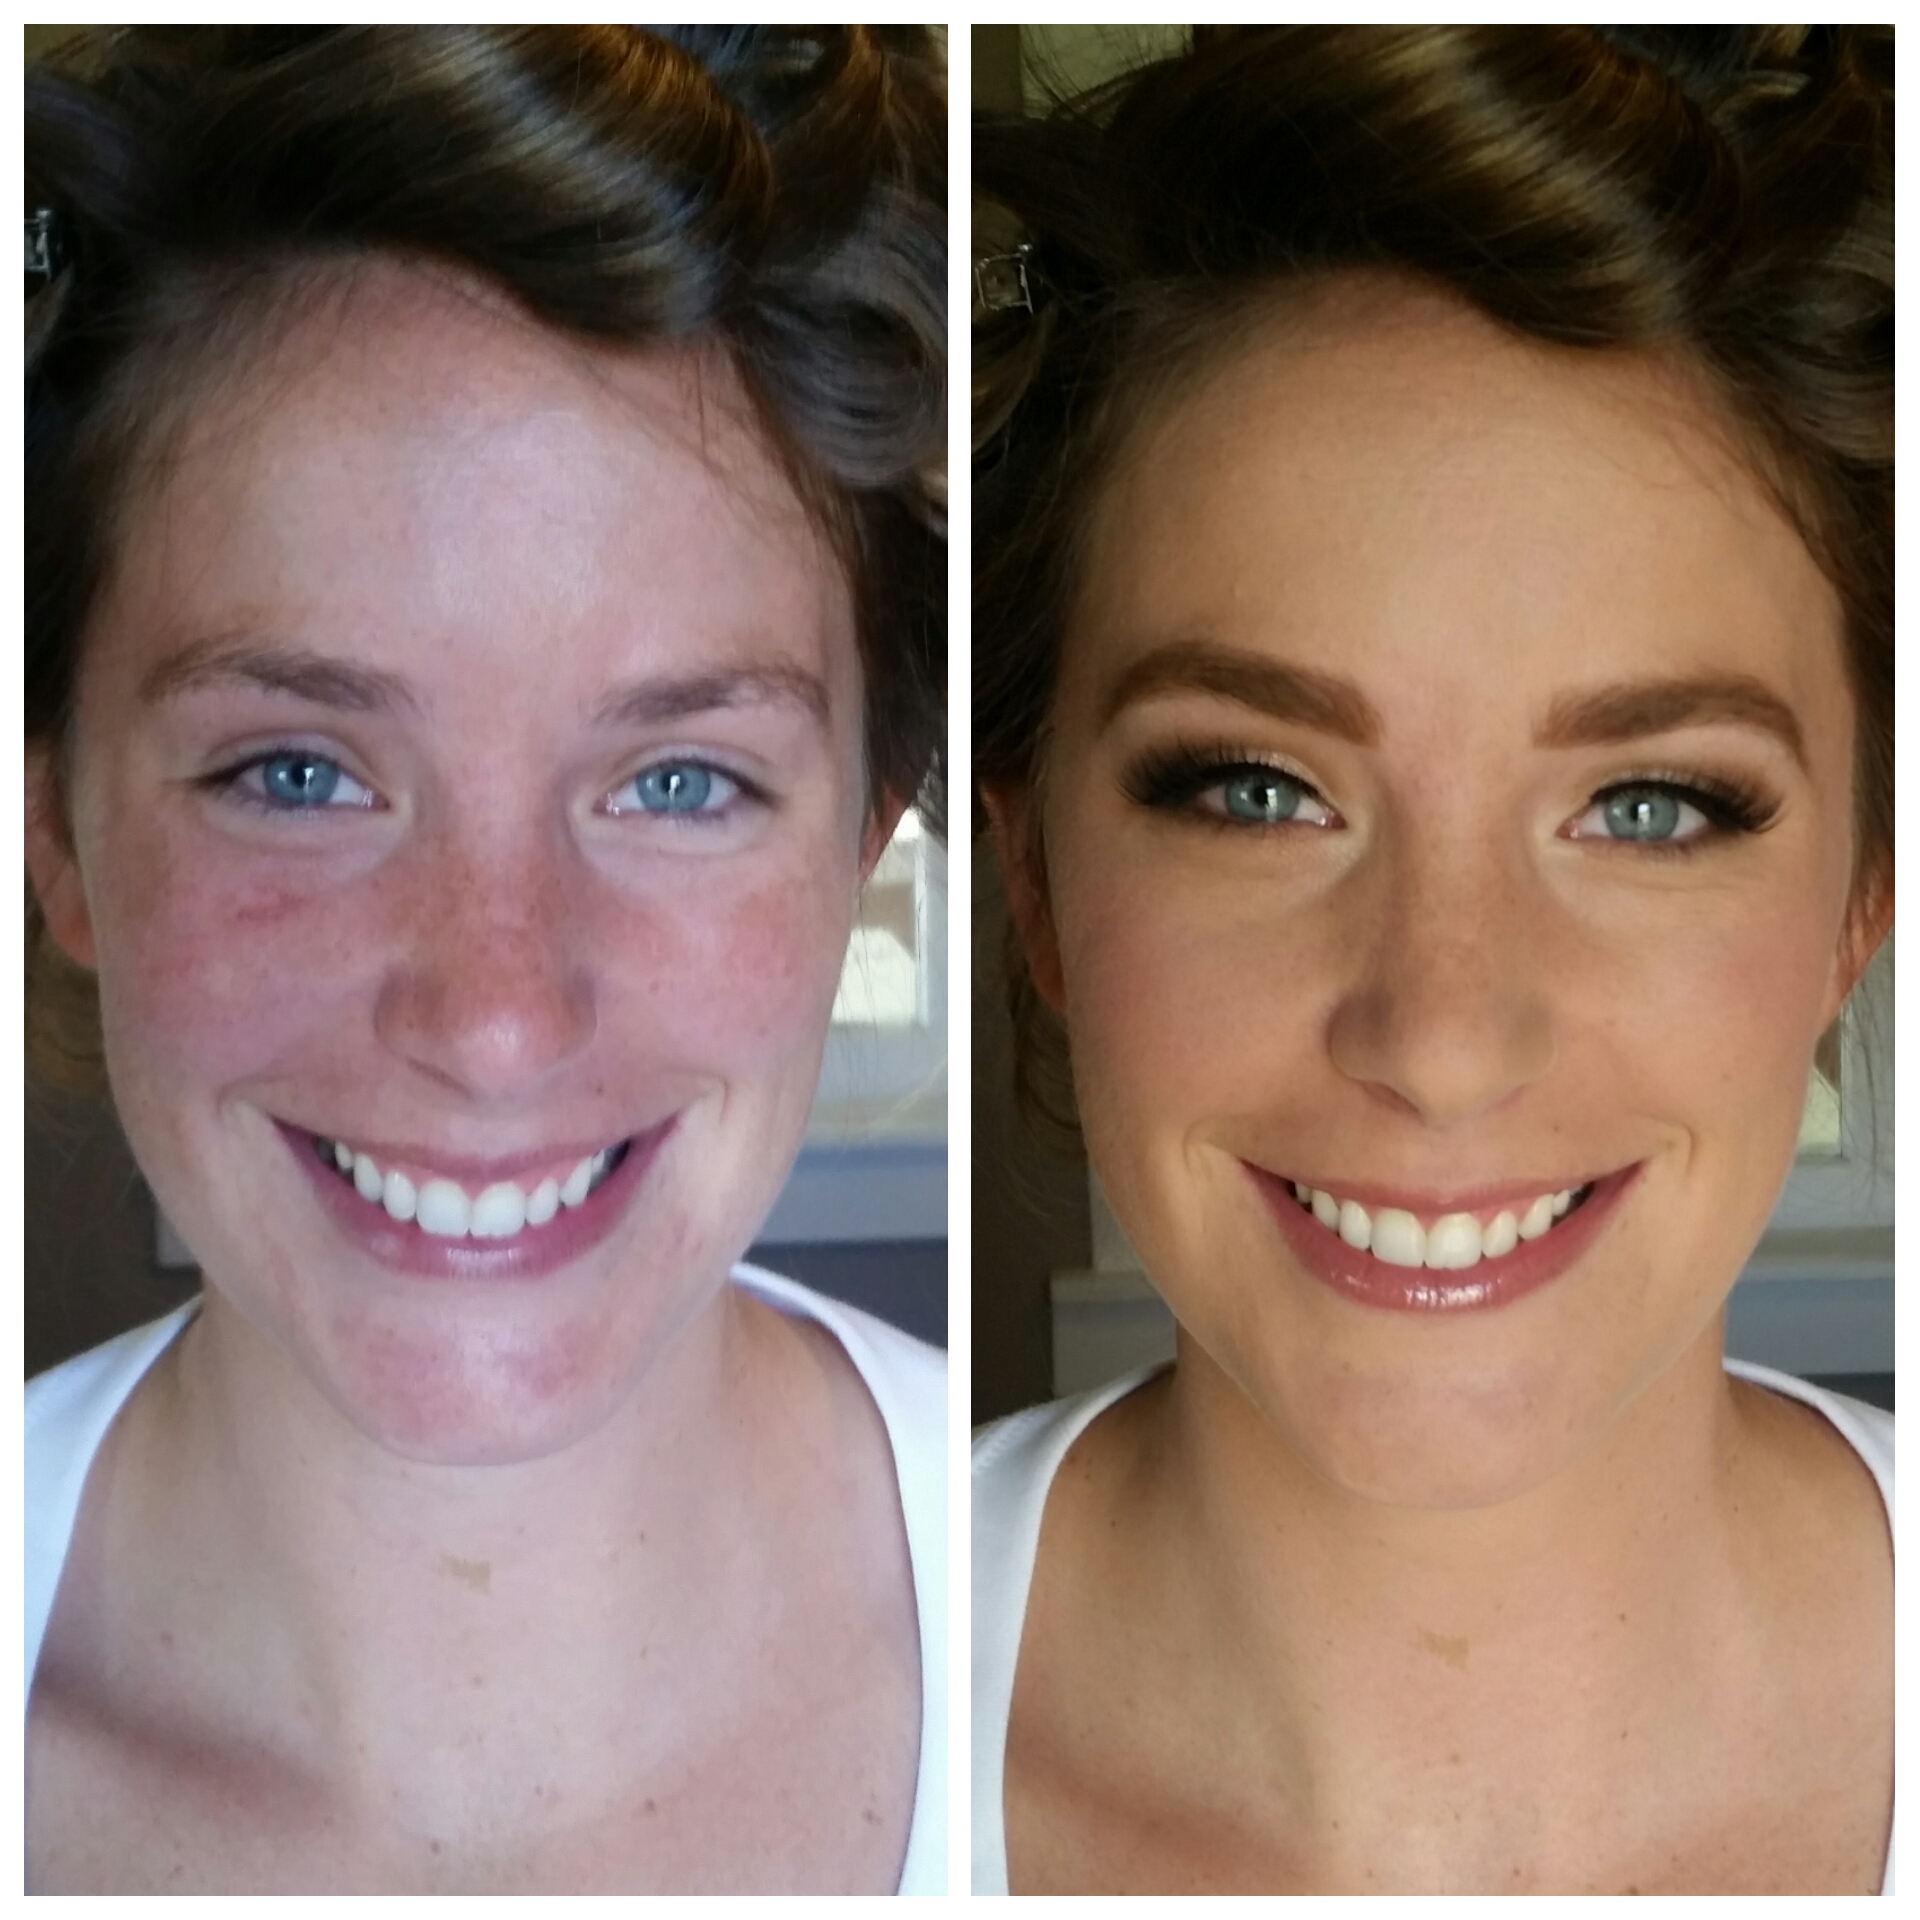 Radiant Bridal Makeup with Airbrush and Mink Lashes by Luminous Beauty Makeup Artist Blaine.jpg